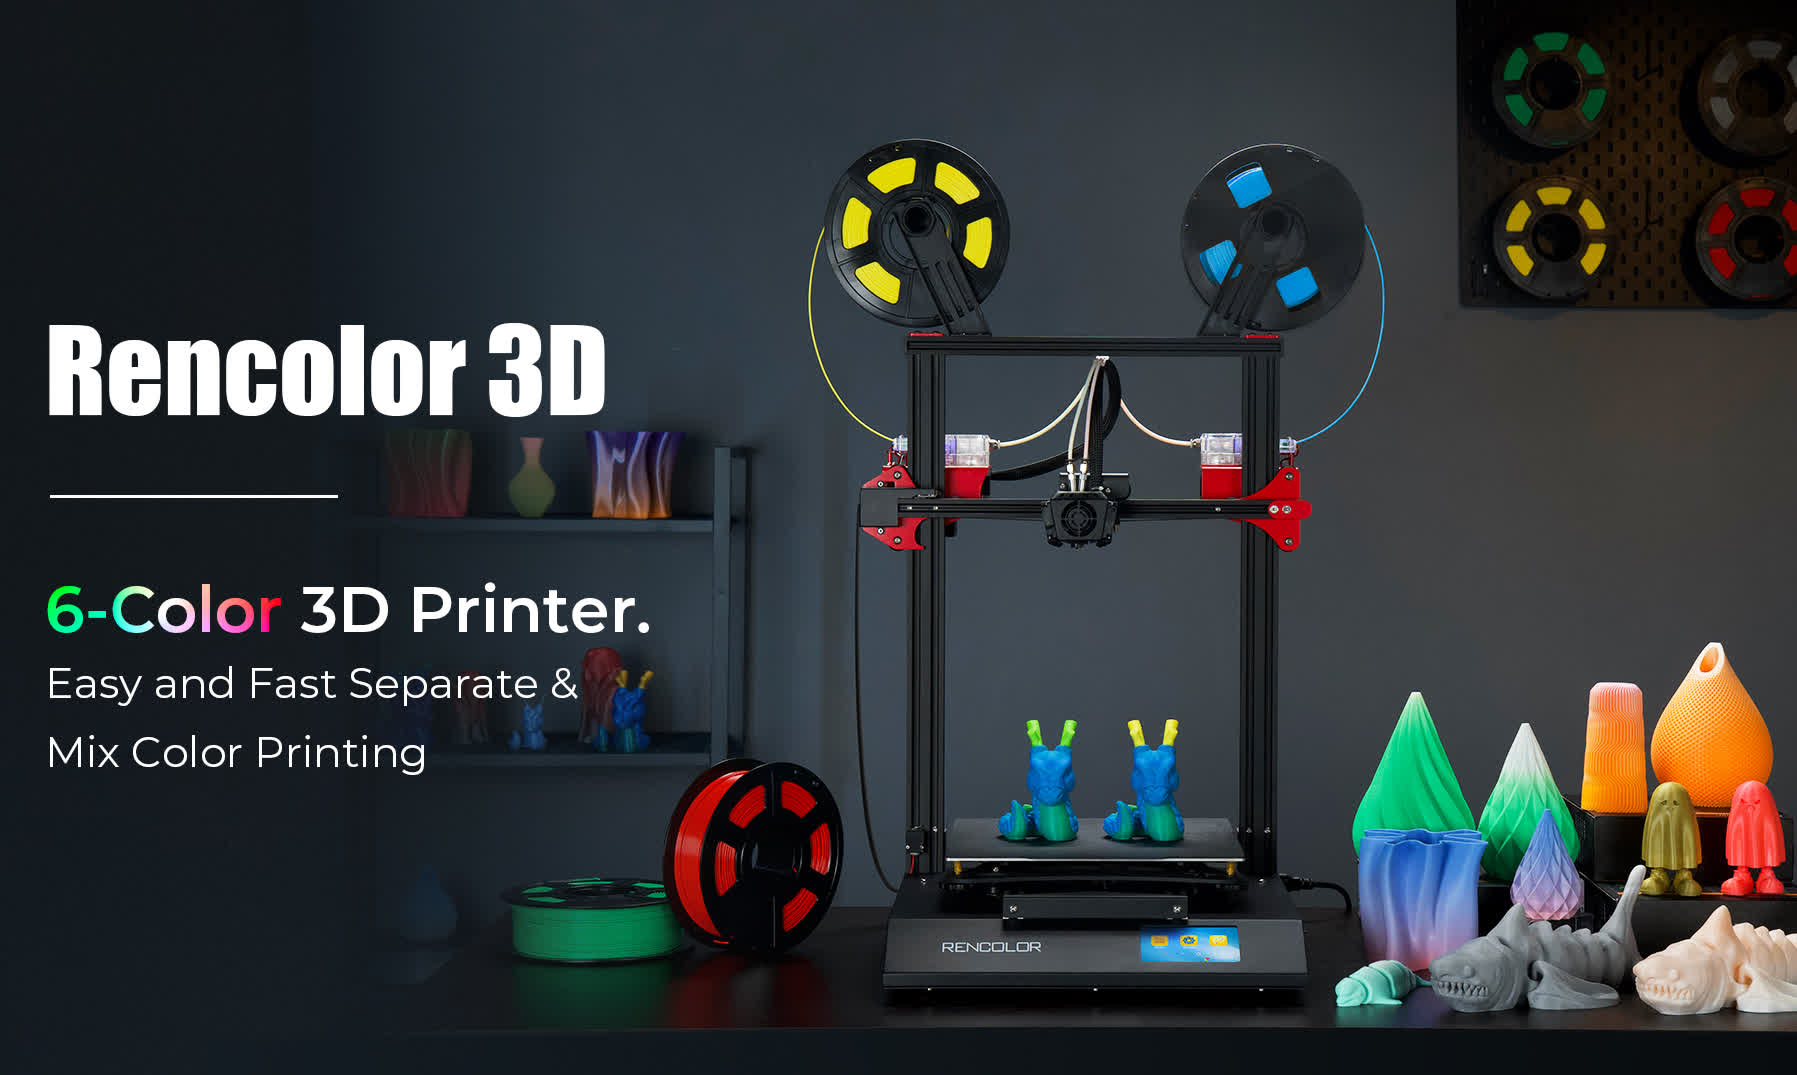 Rencolor's latest 3D printer can print in six colors, and even do gradients